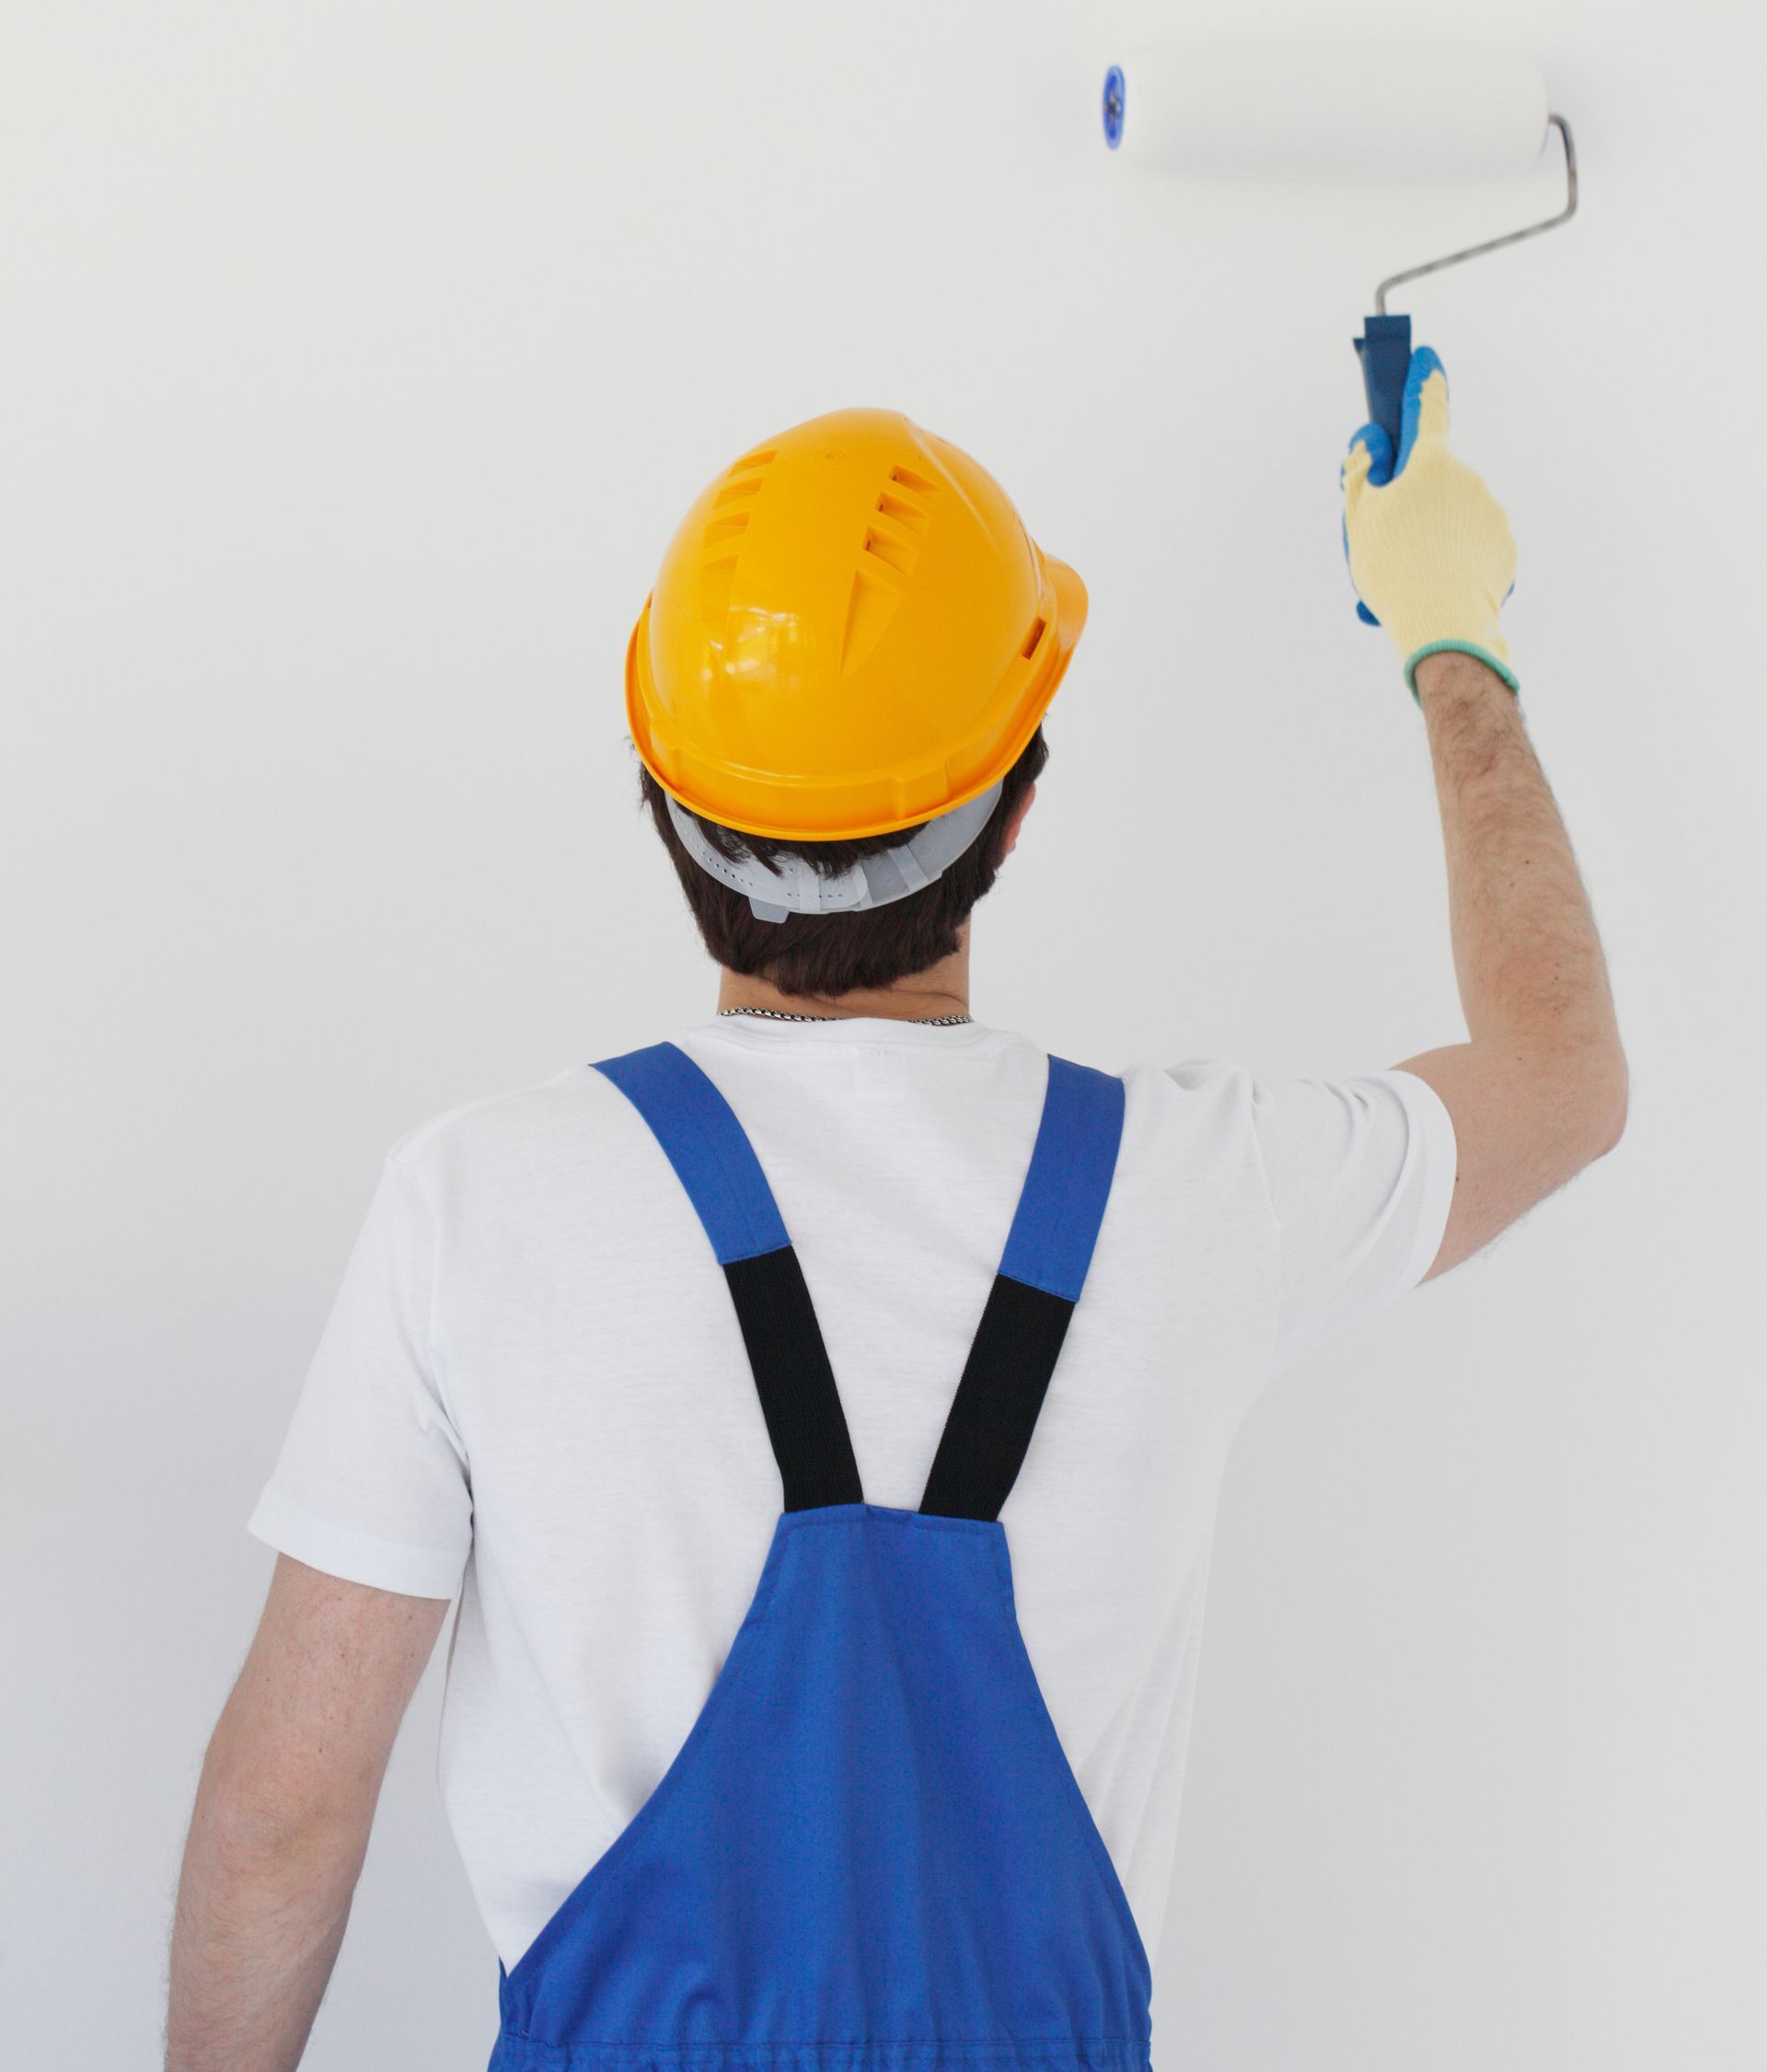 a man wearing a hard hat is painting a wall with a paint roller